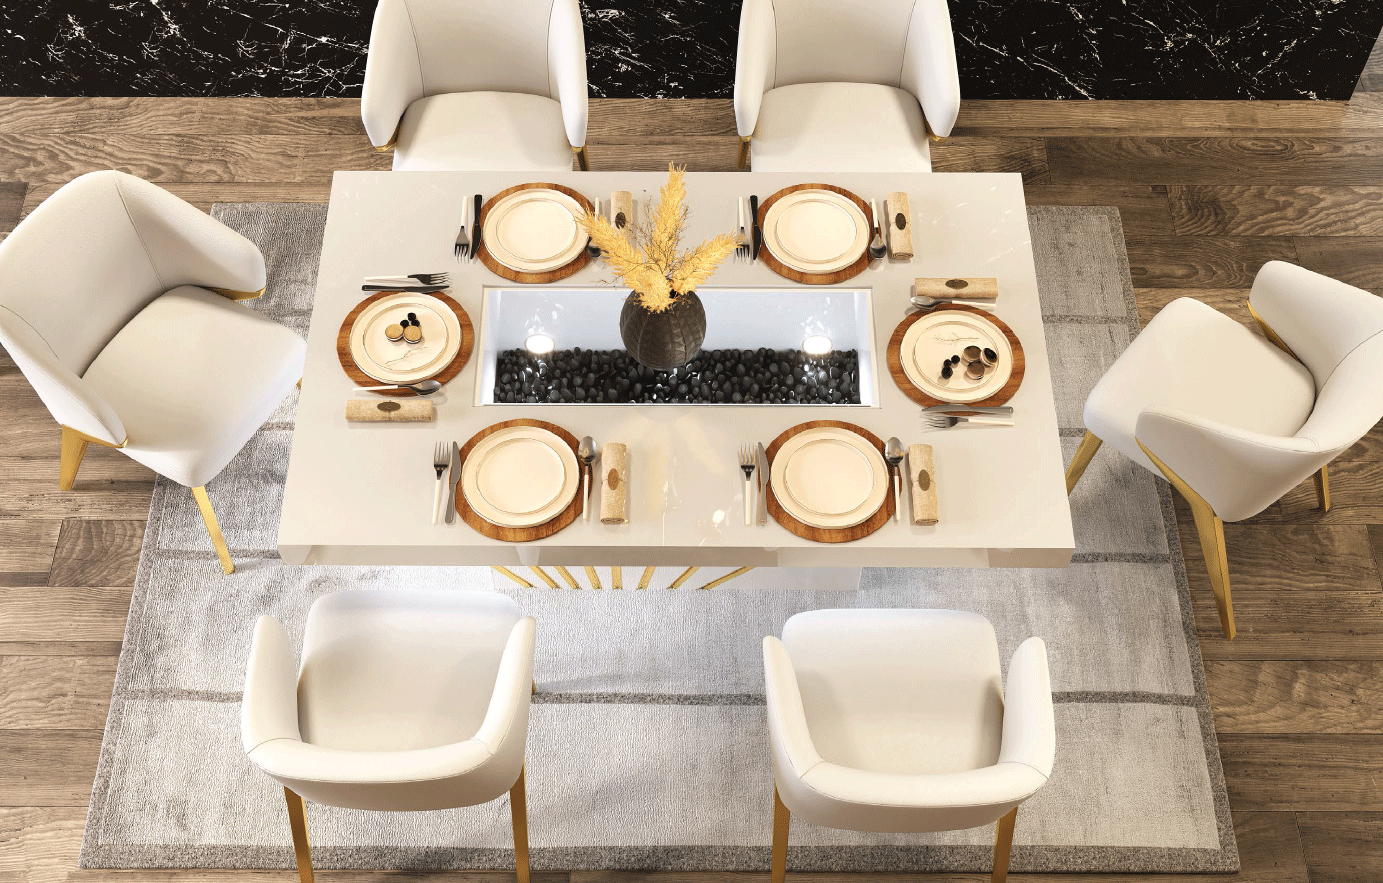 Brands Franco Serik II Collection, Spain Oro White Dining room Additional Items